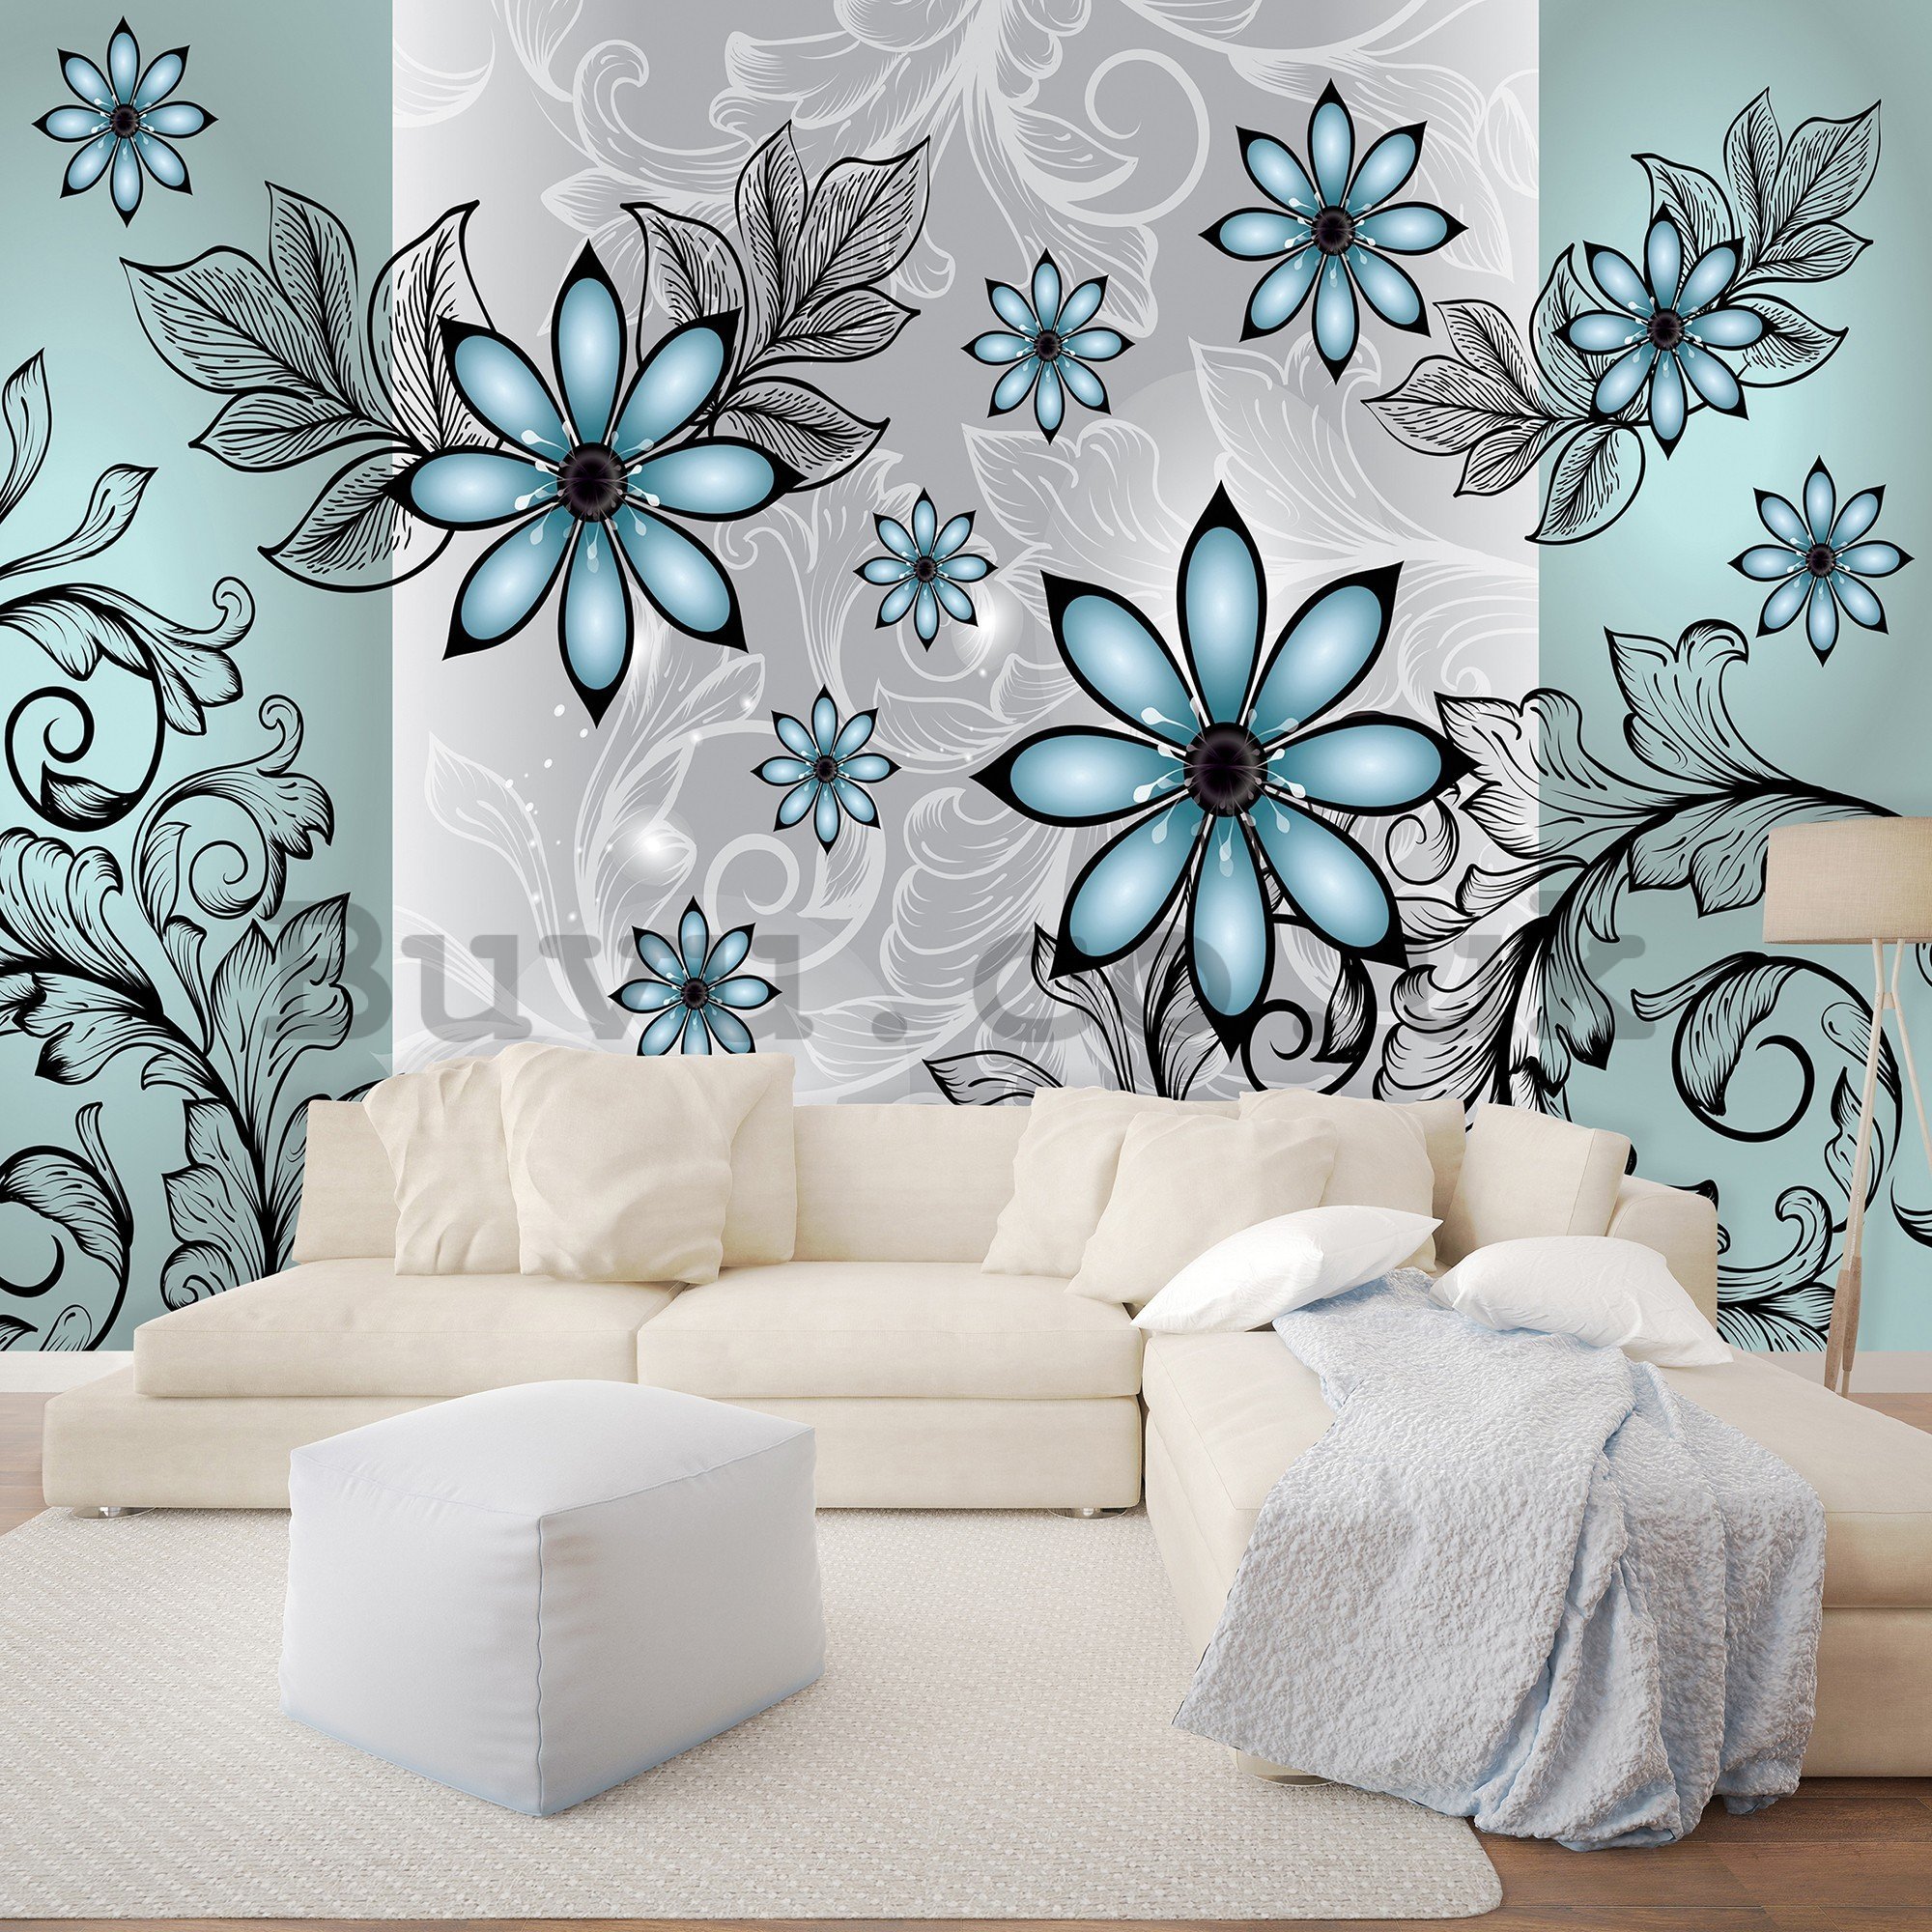 Wall mural vlies: Turquoise flowers - 416x254 cm